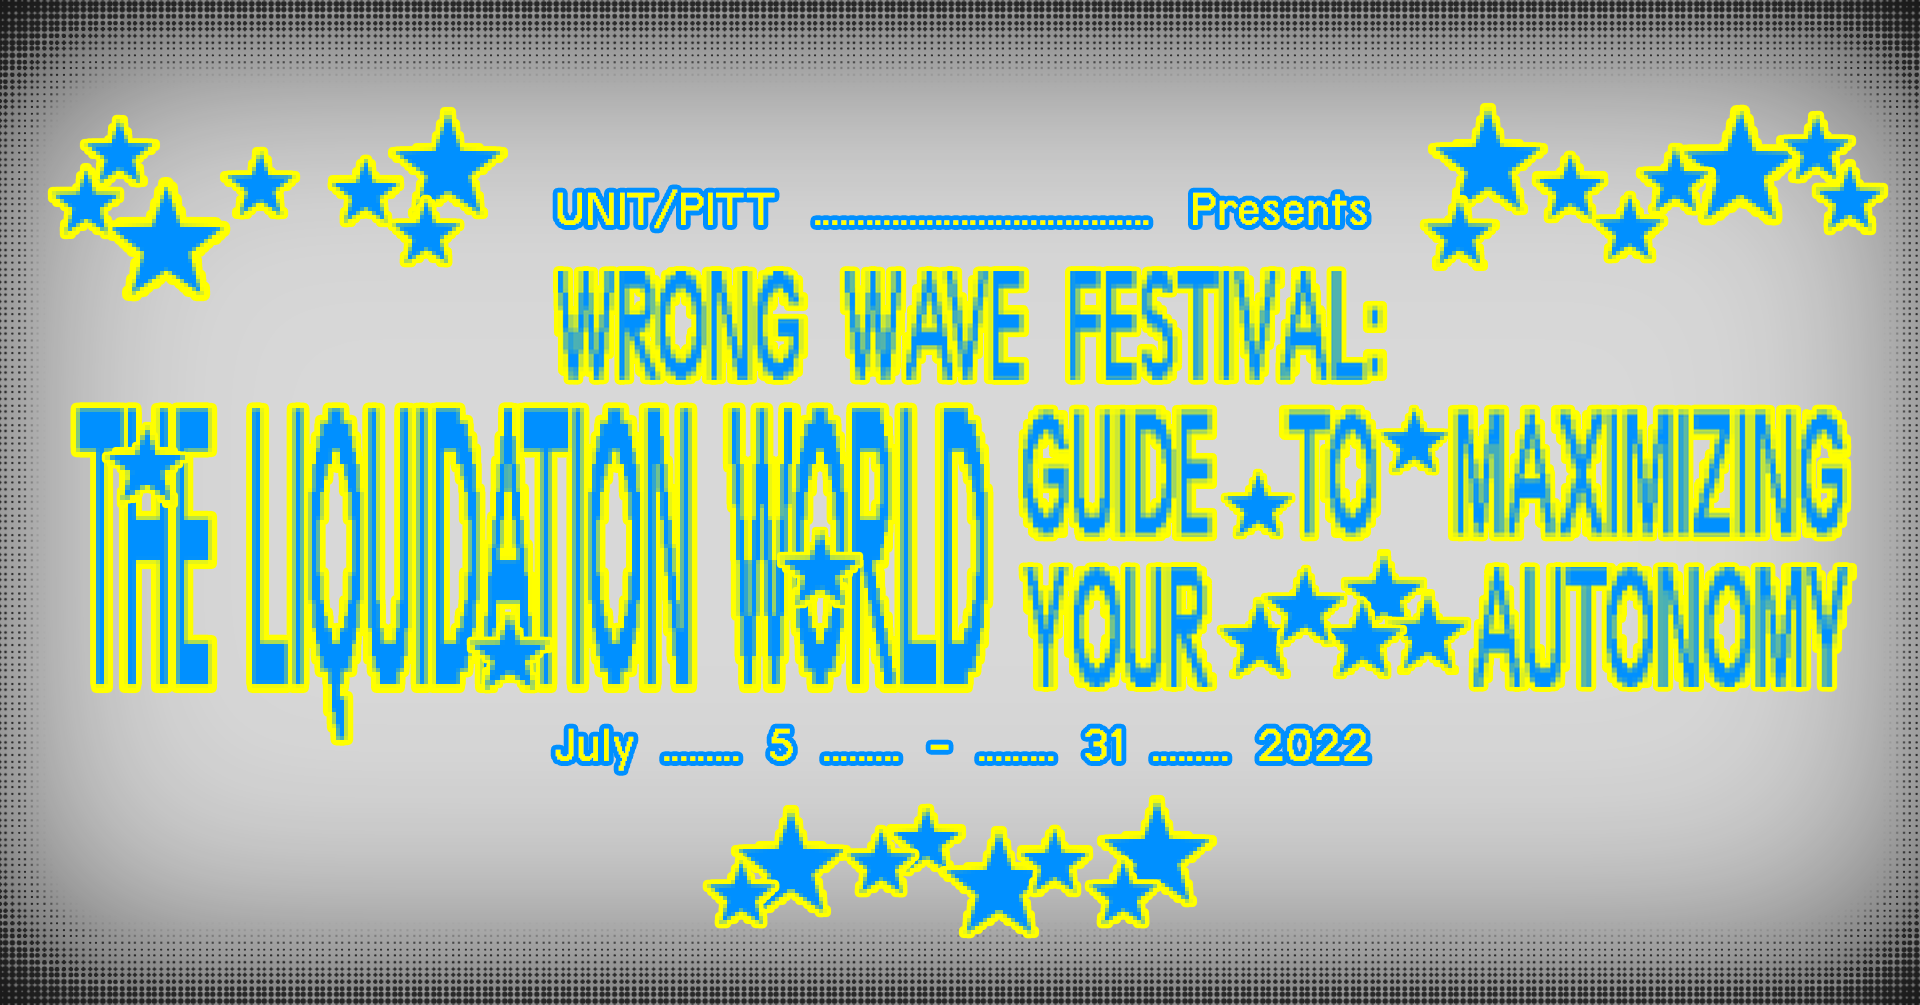 Vertical Wrong Wave Festival poster containing text with festival details. The background is grey with a darker grid gradient around the edges of the image. The text is chunky sky blue with neon yellow borders, reminiscent of early '90s website aesthetic. There are decorative blue stars with yellow contours scattered around the text.